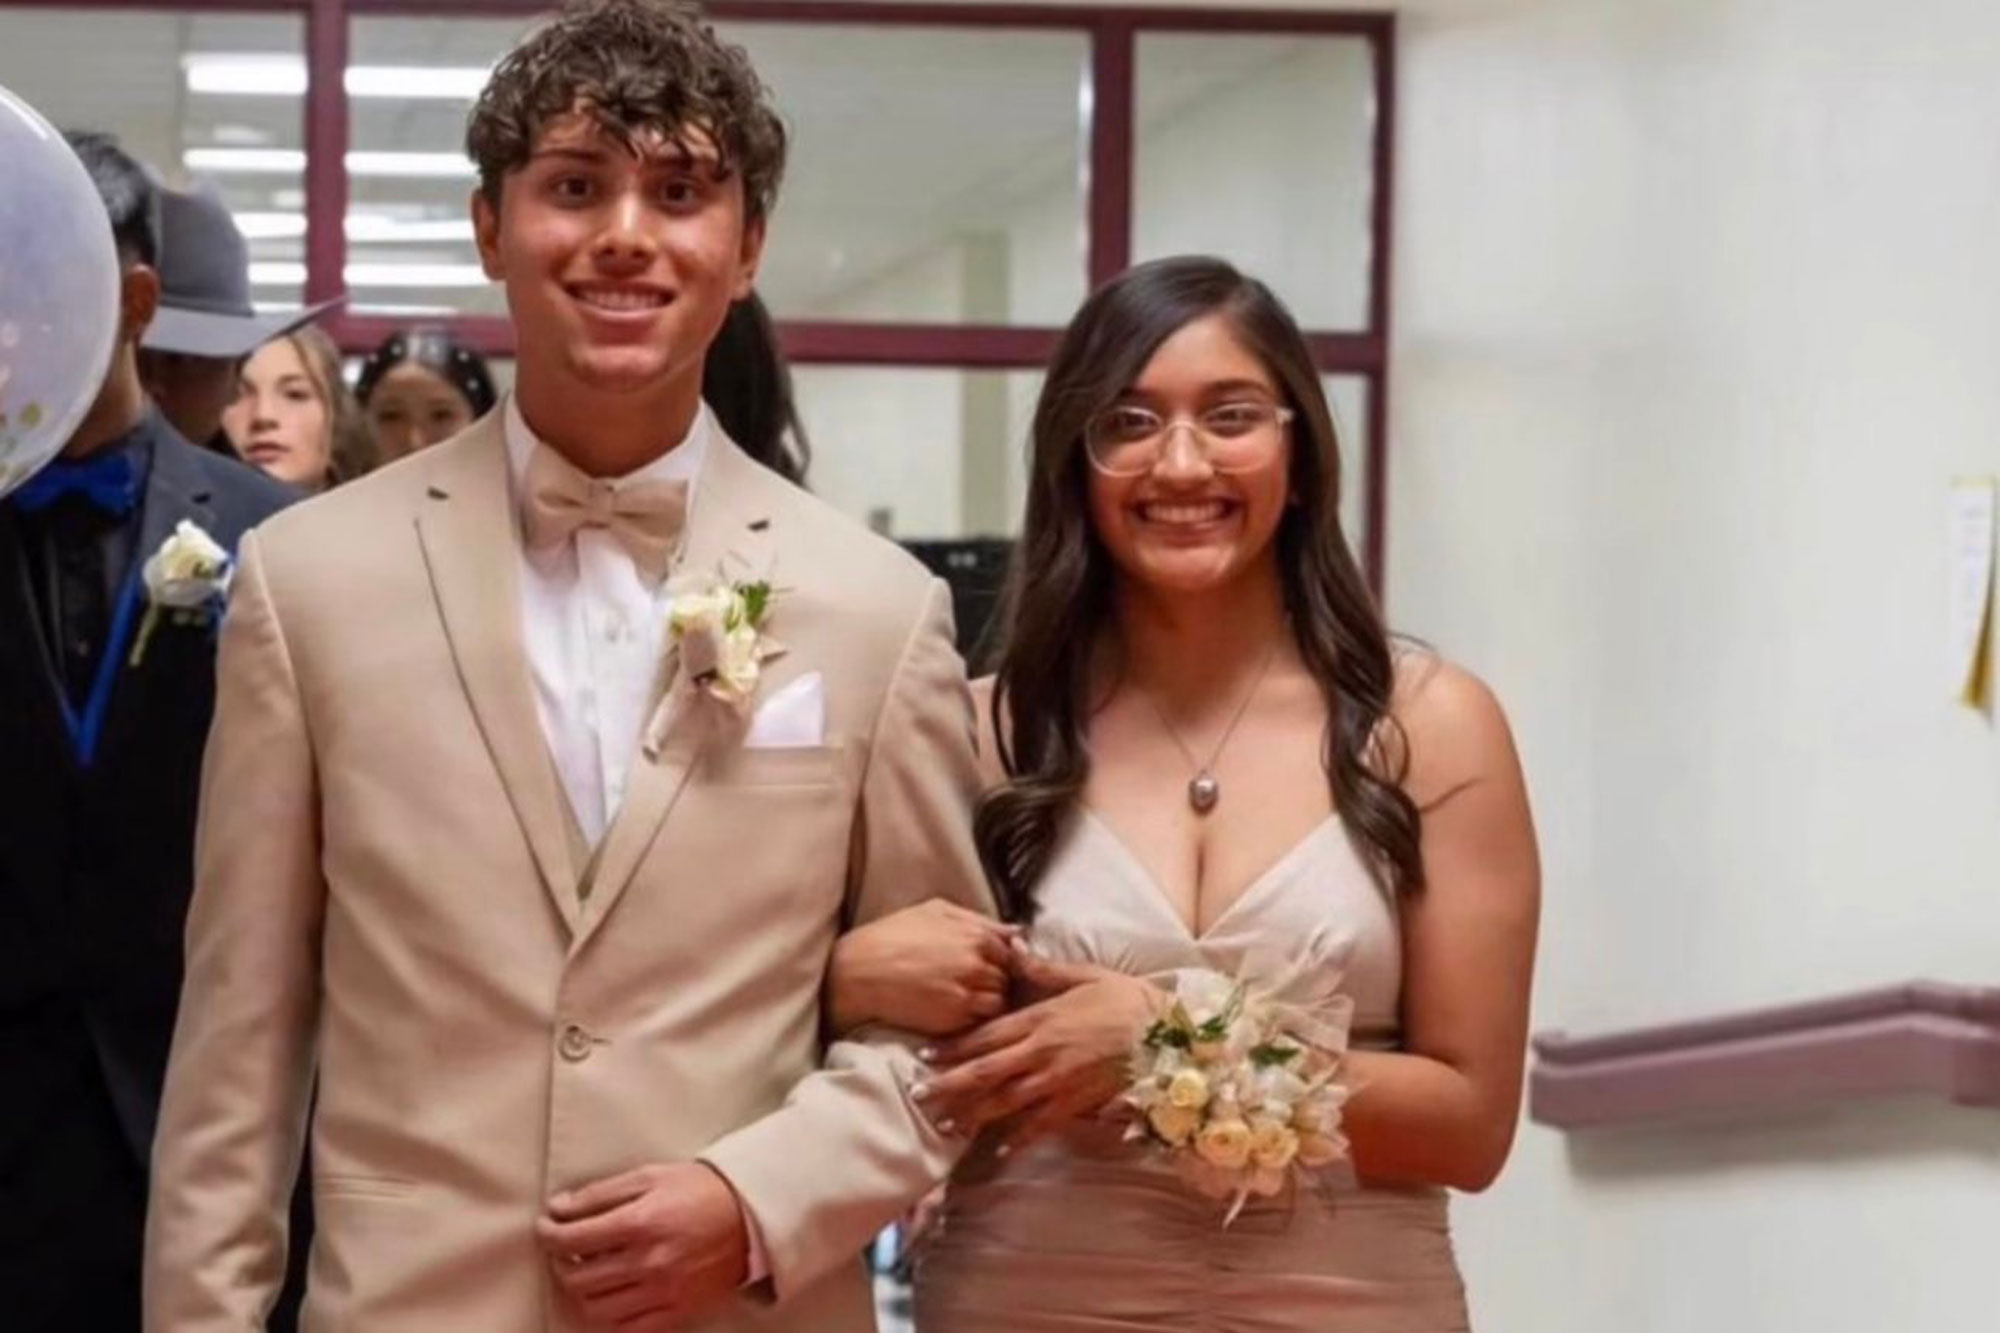 Smiling Alexee Trevizo seen at prom after dumping newborn baby in